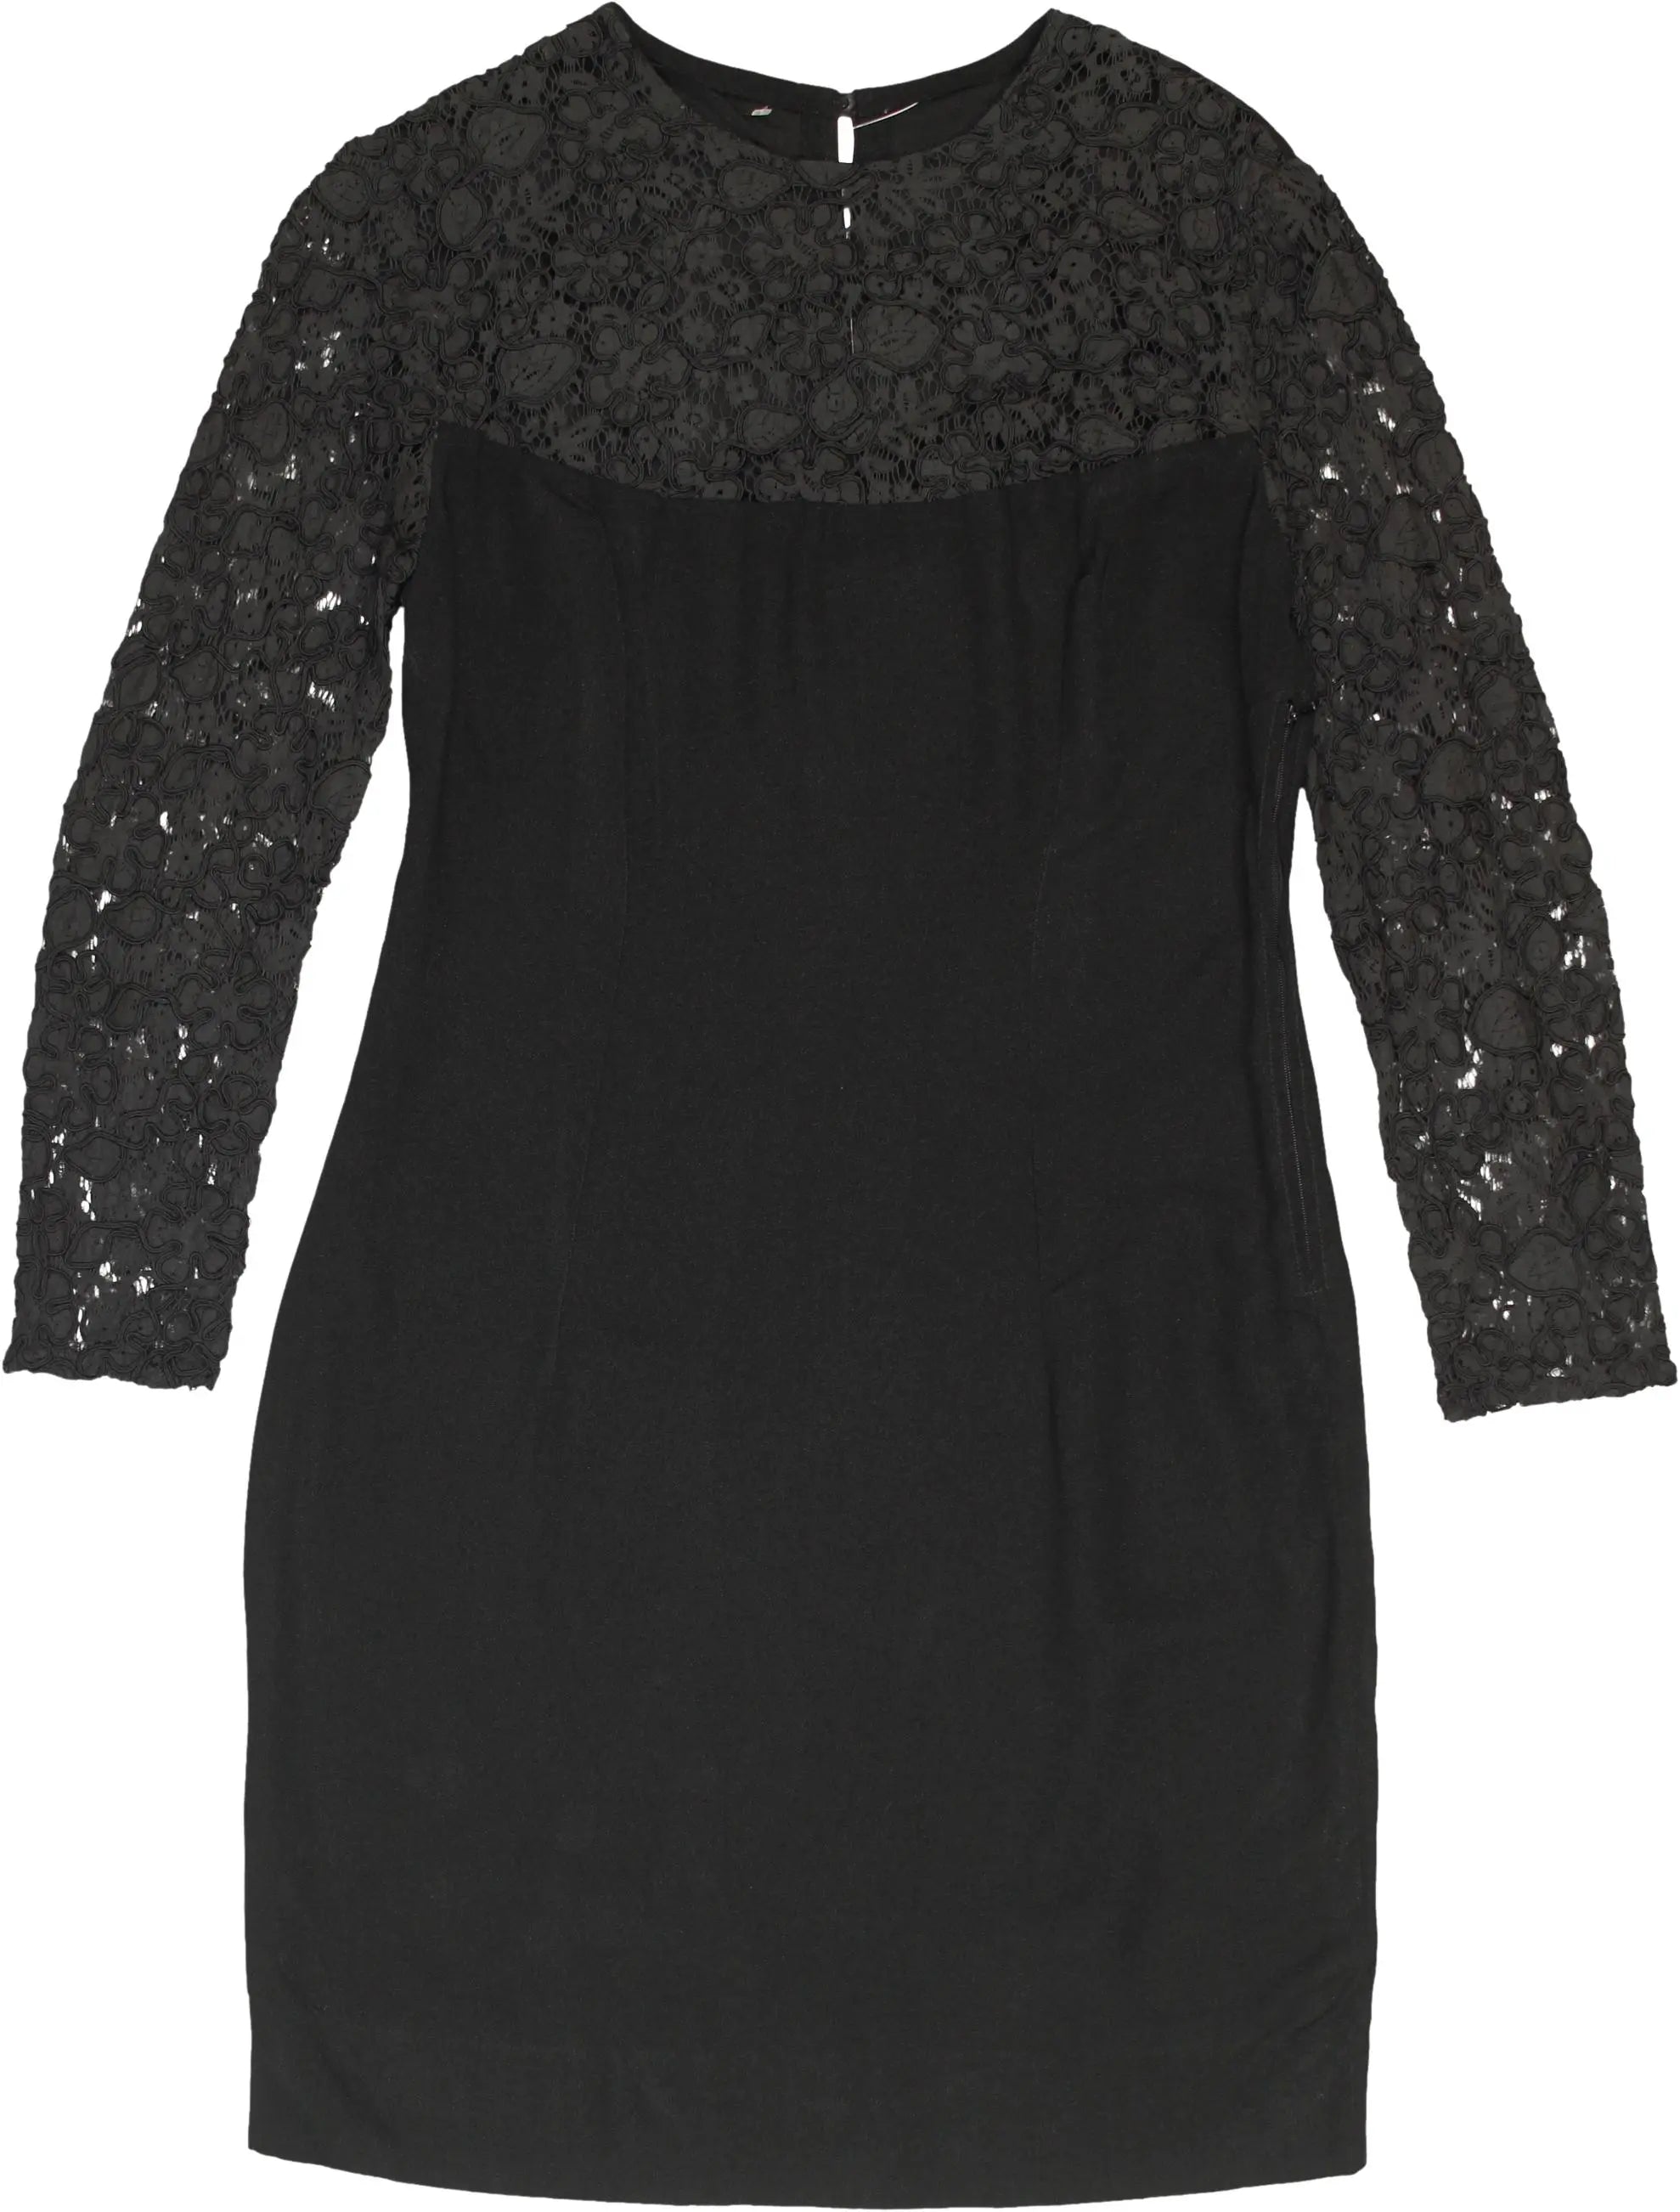 Unknown - Black Lace Dress- ThriftTale.com - Vintage and second handclothing